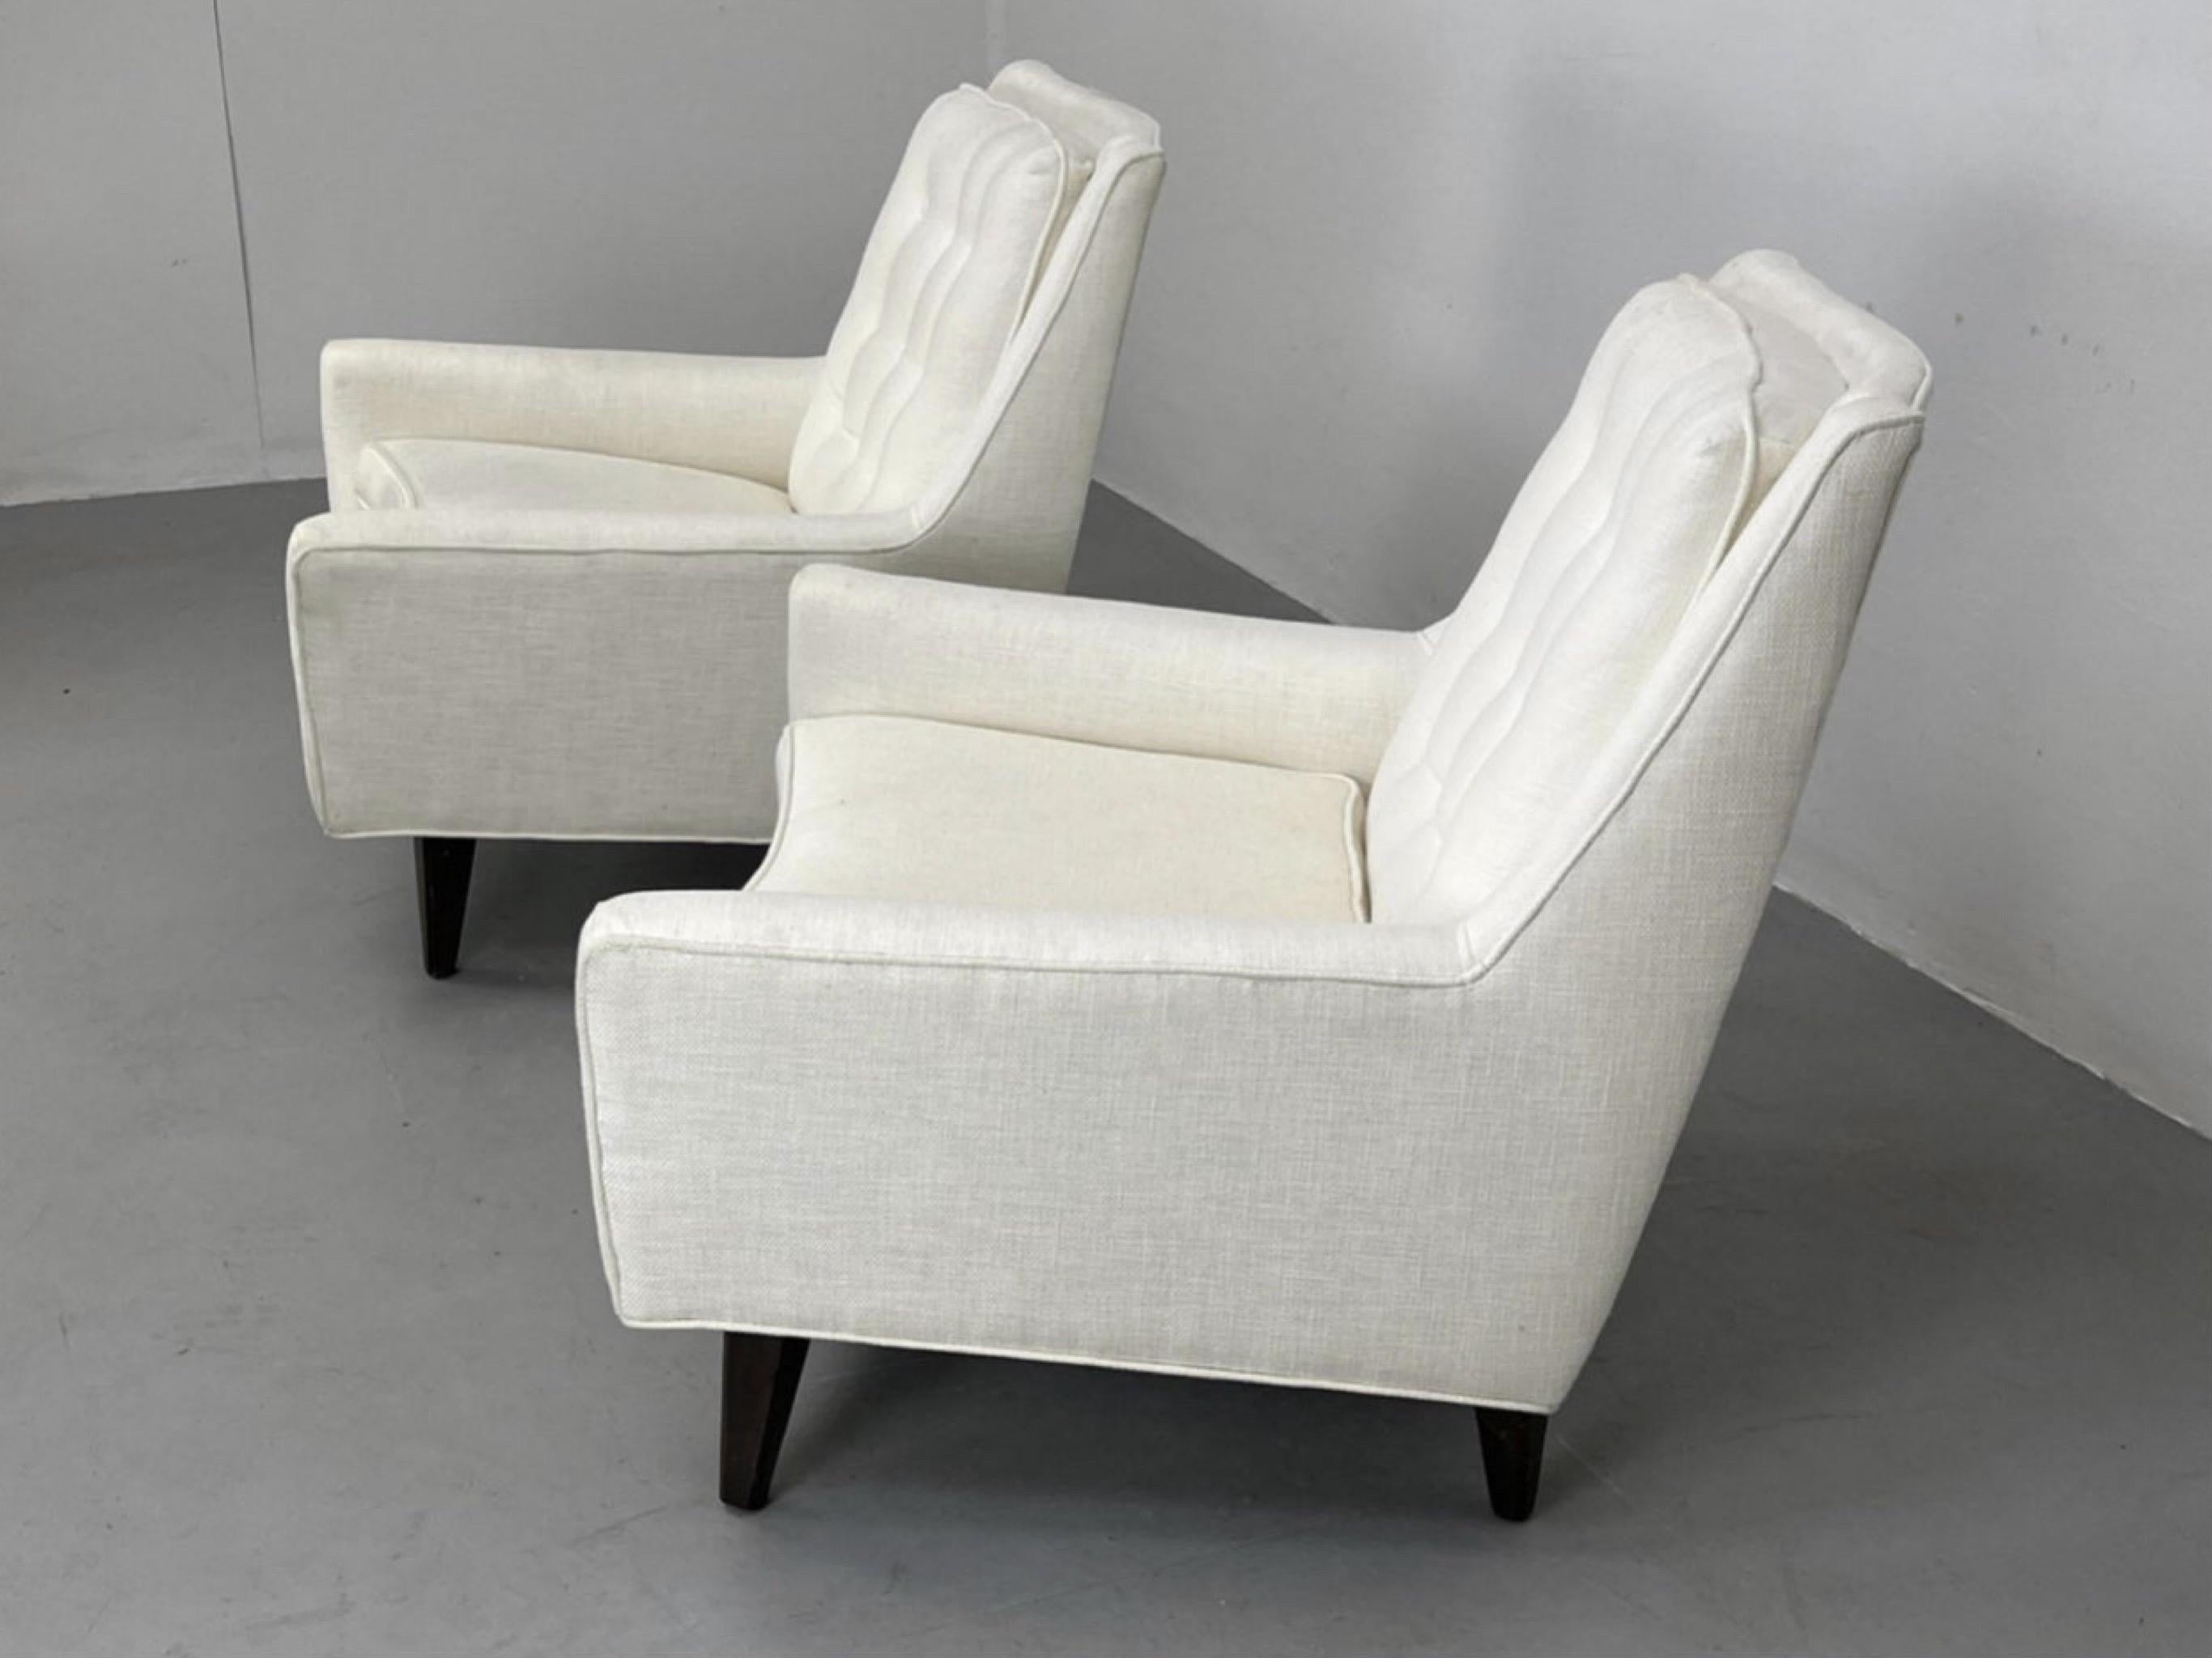 Mid-Century Modern Edward Wormley Attributed White Upholstered Lounge Chairs - a Pair